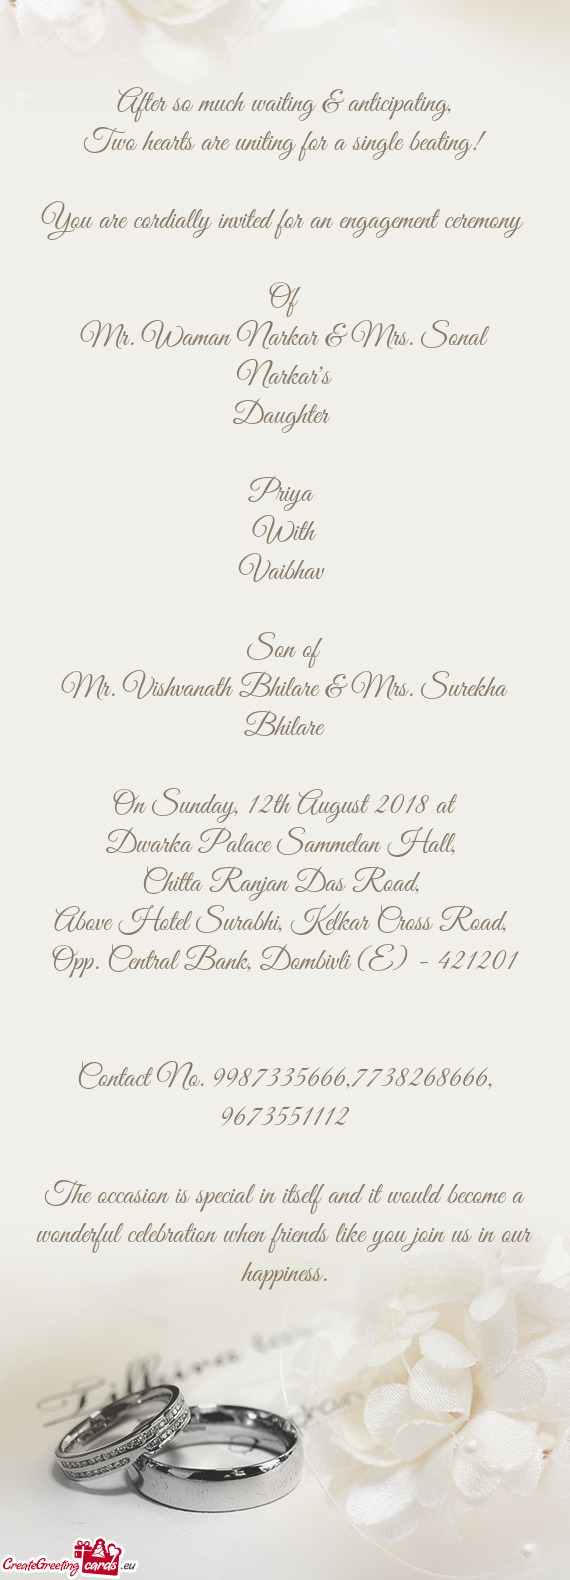 You are cordially invited for an engagement ceremony